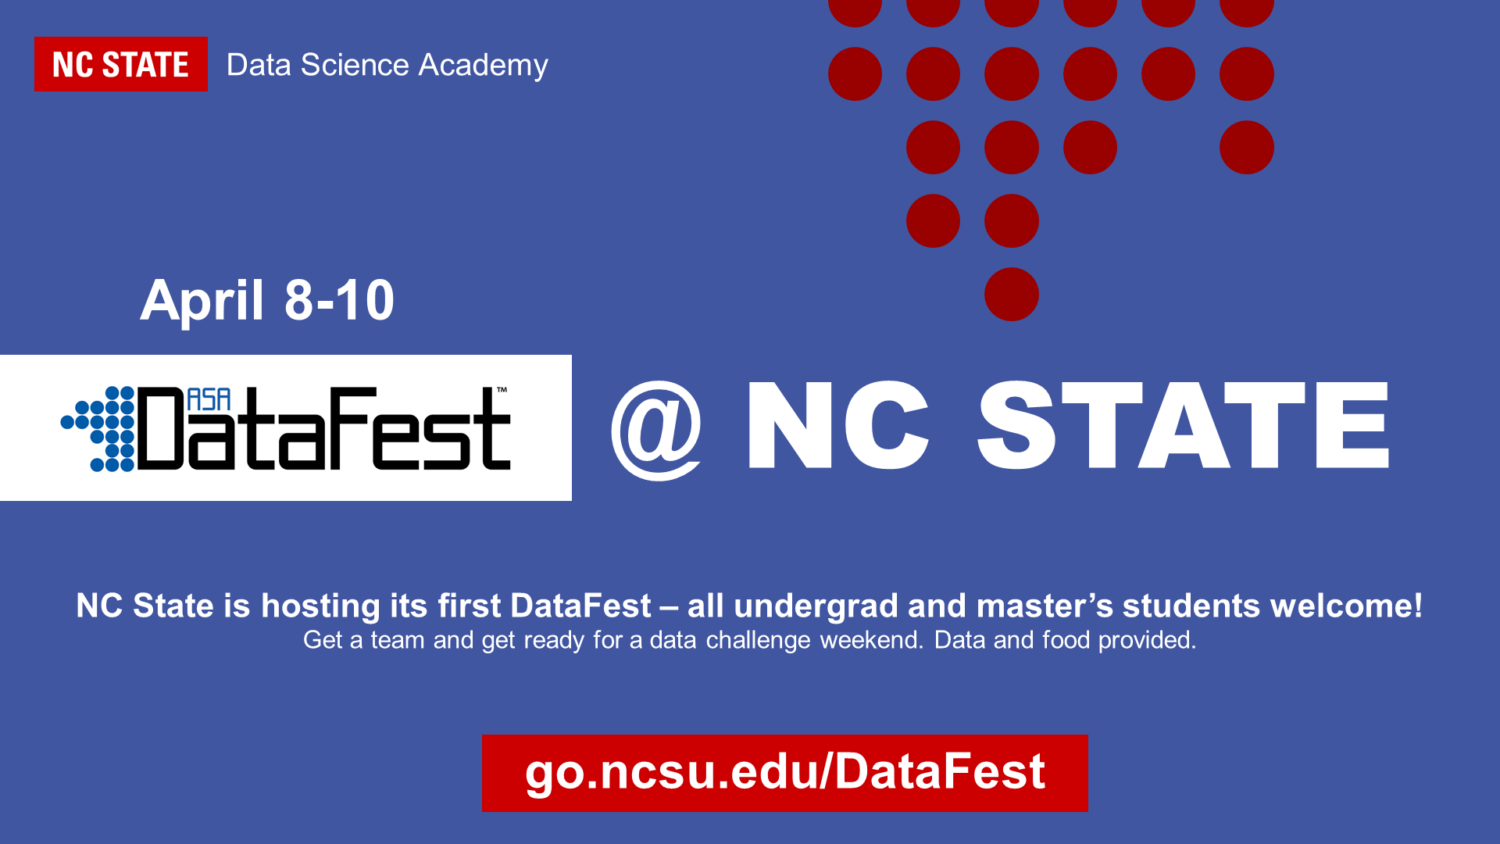 DataFest @ NC State header image. All information in event text.